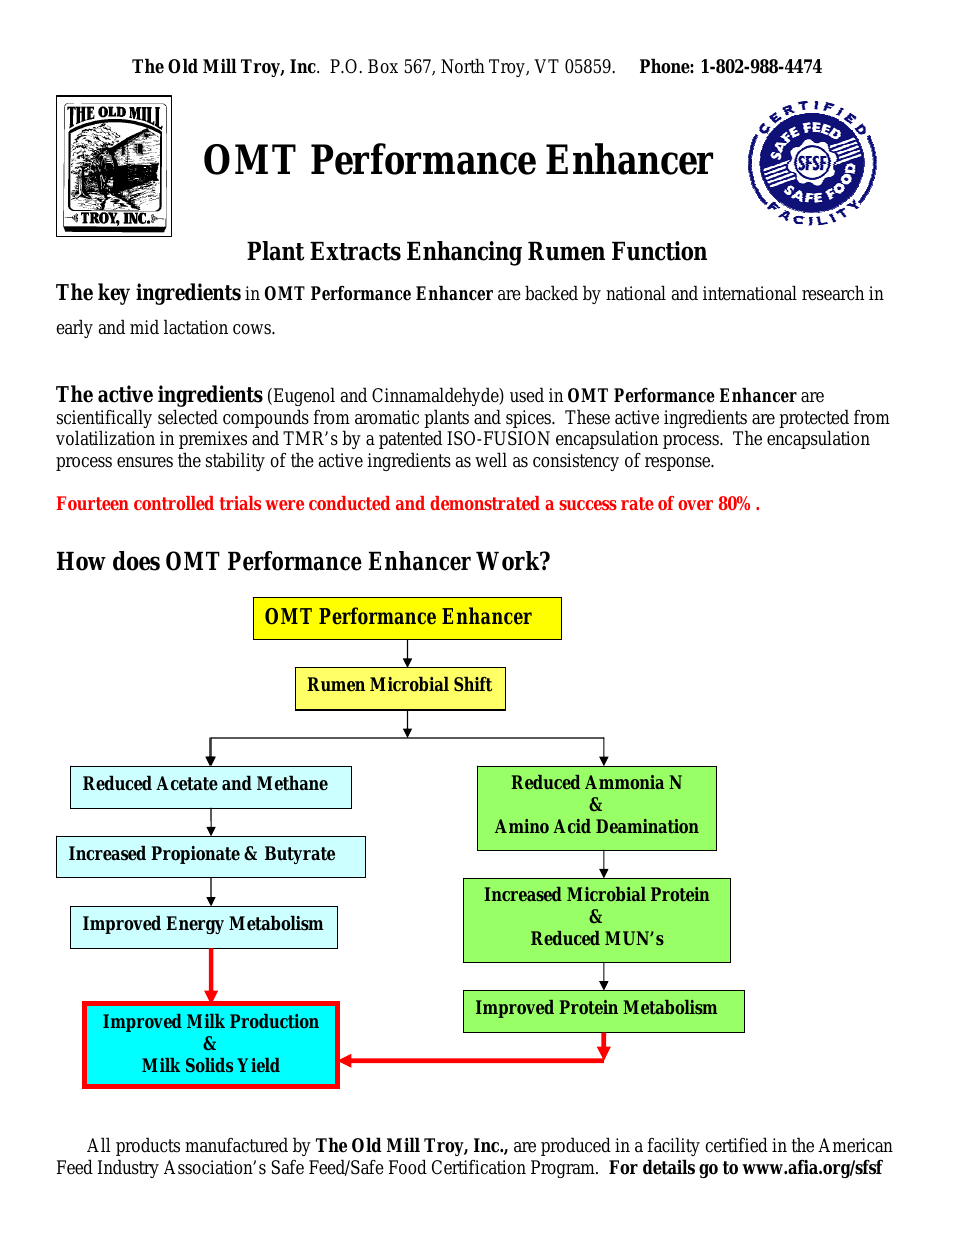 OMT Performance Enhancer - Plant Extracts Enhancing Rumen Function